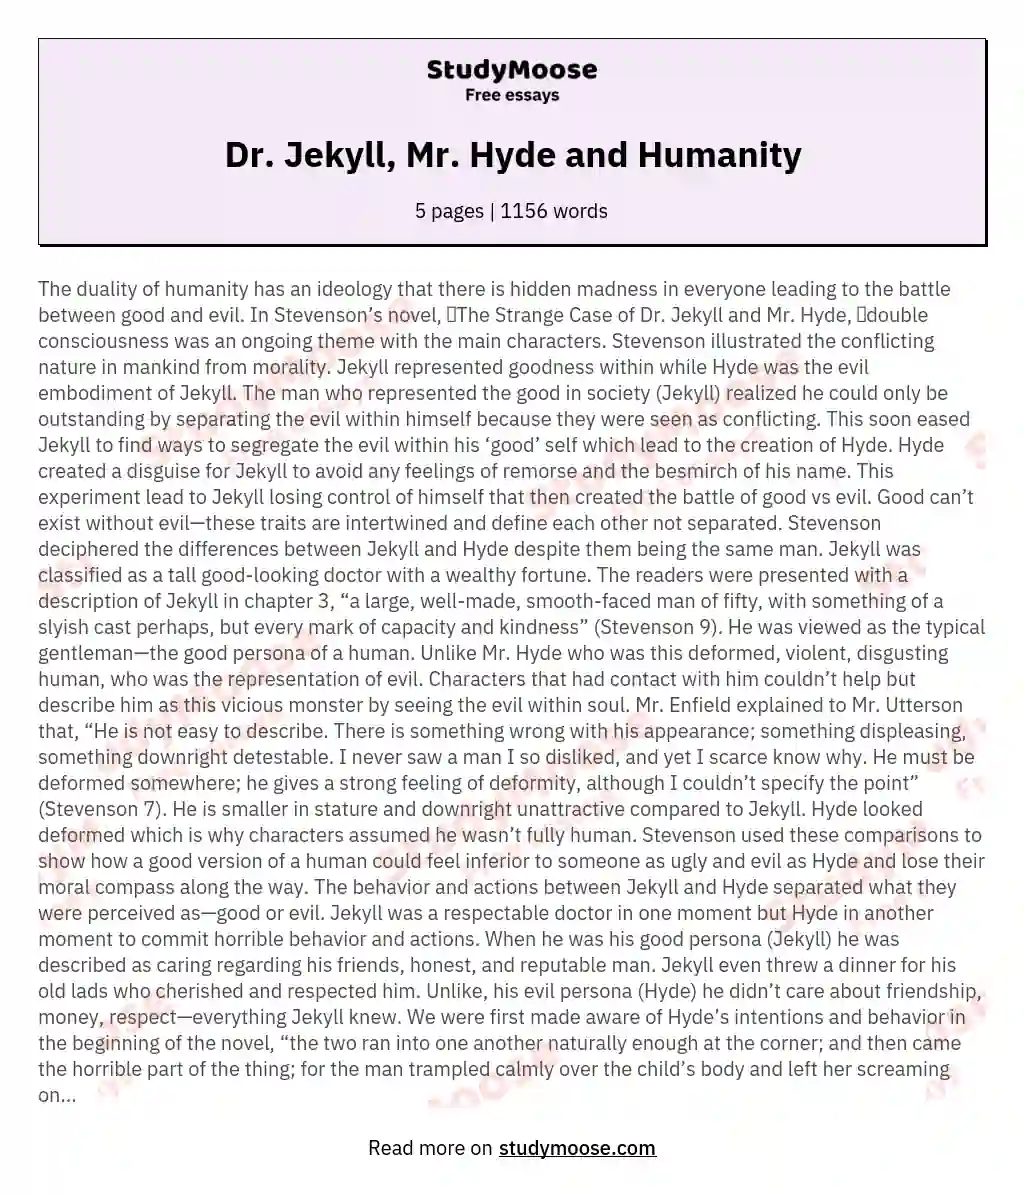 Dr. Jekyll, Mr. Hyde and Humanity essay